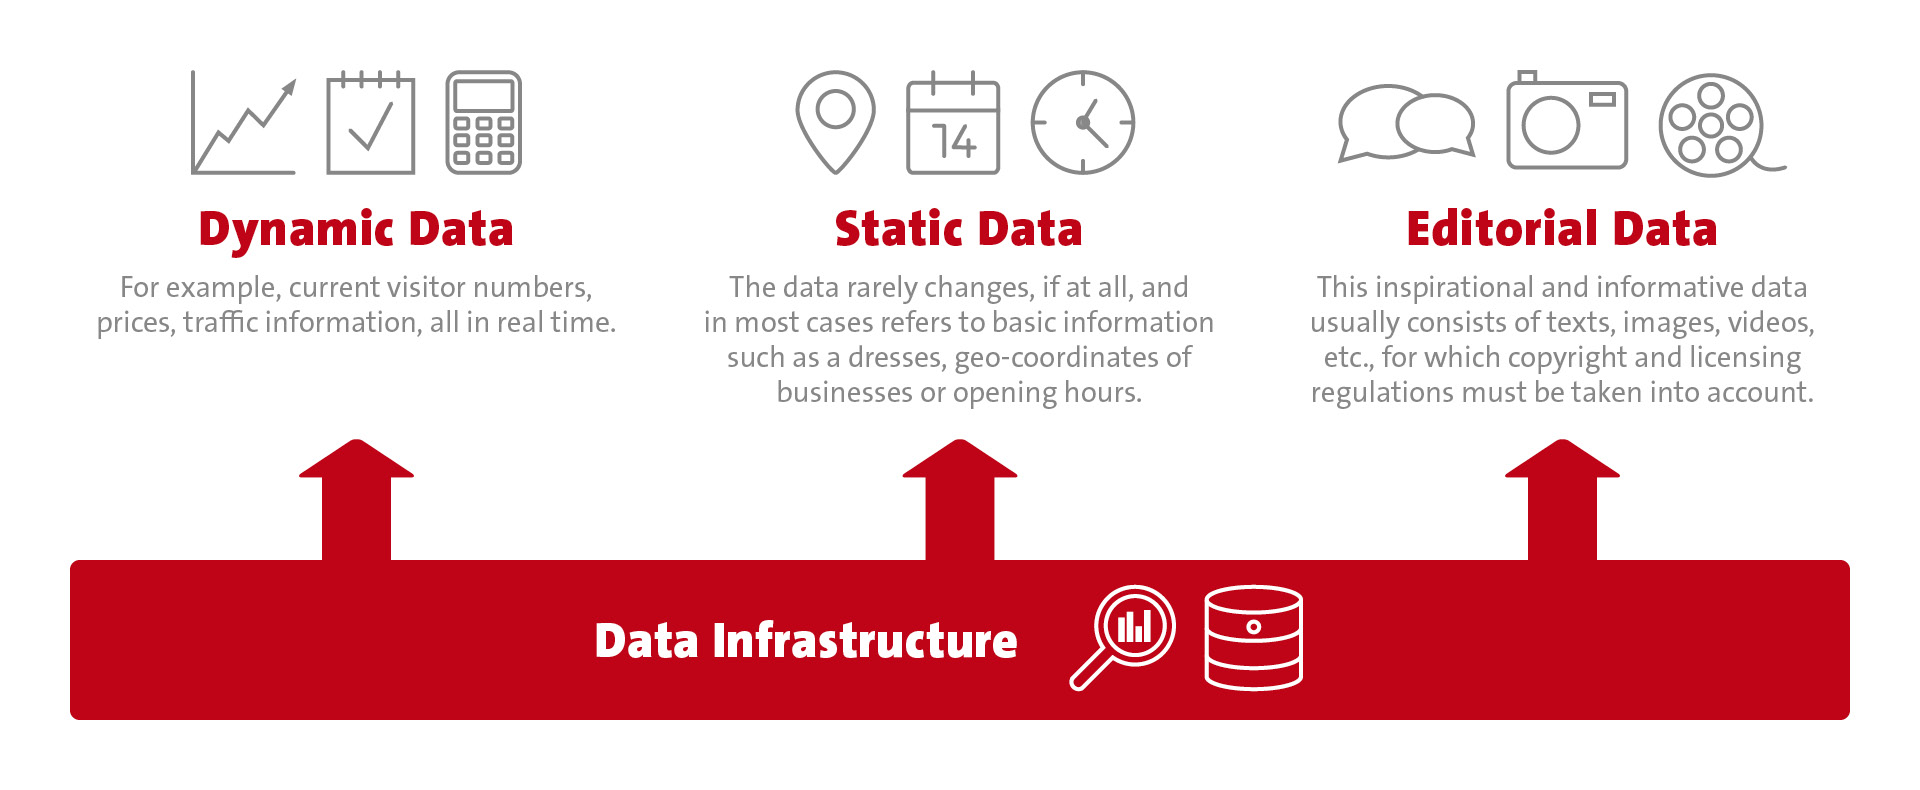 Graphic Data infrastructure as a basis for digital applications